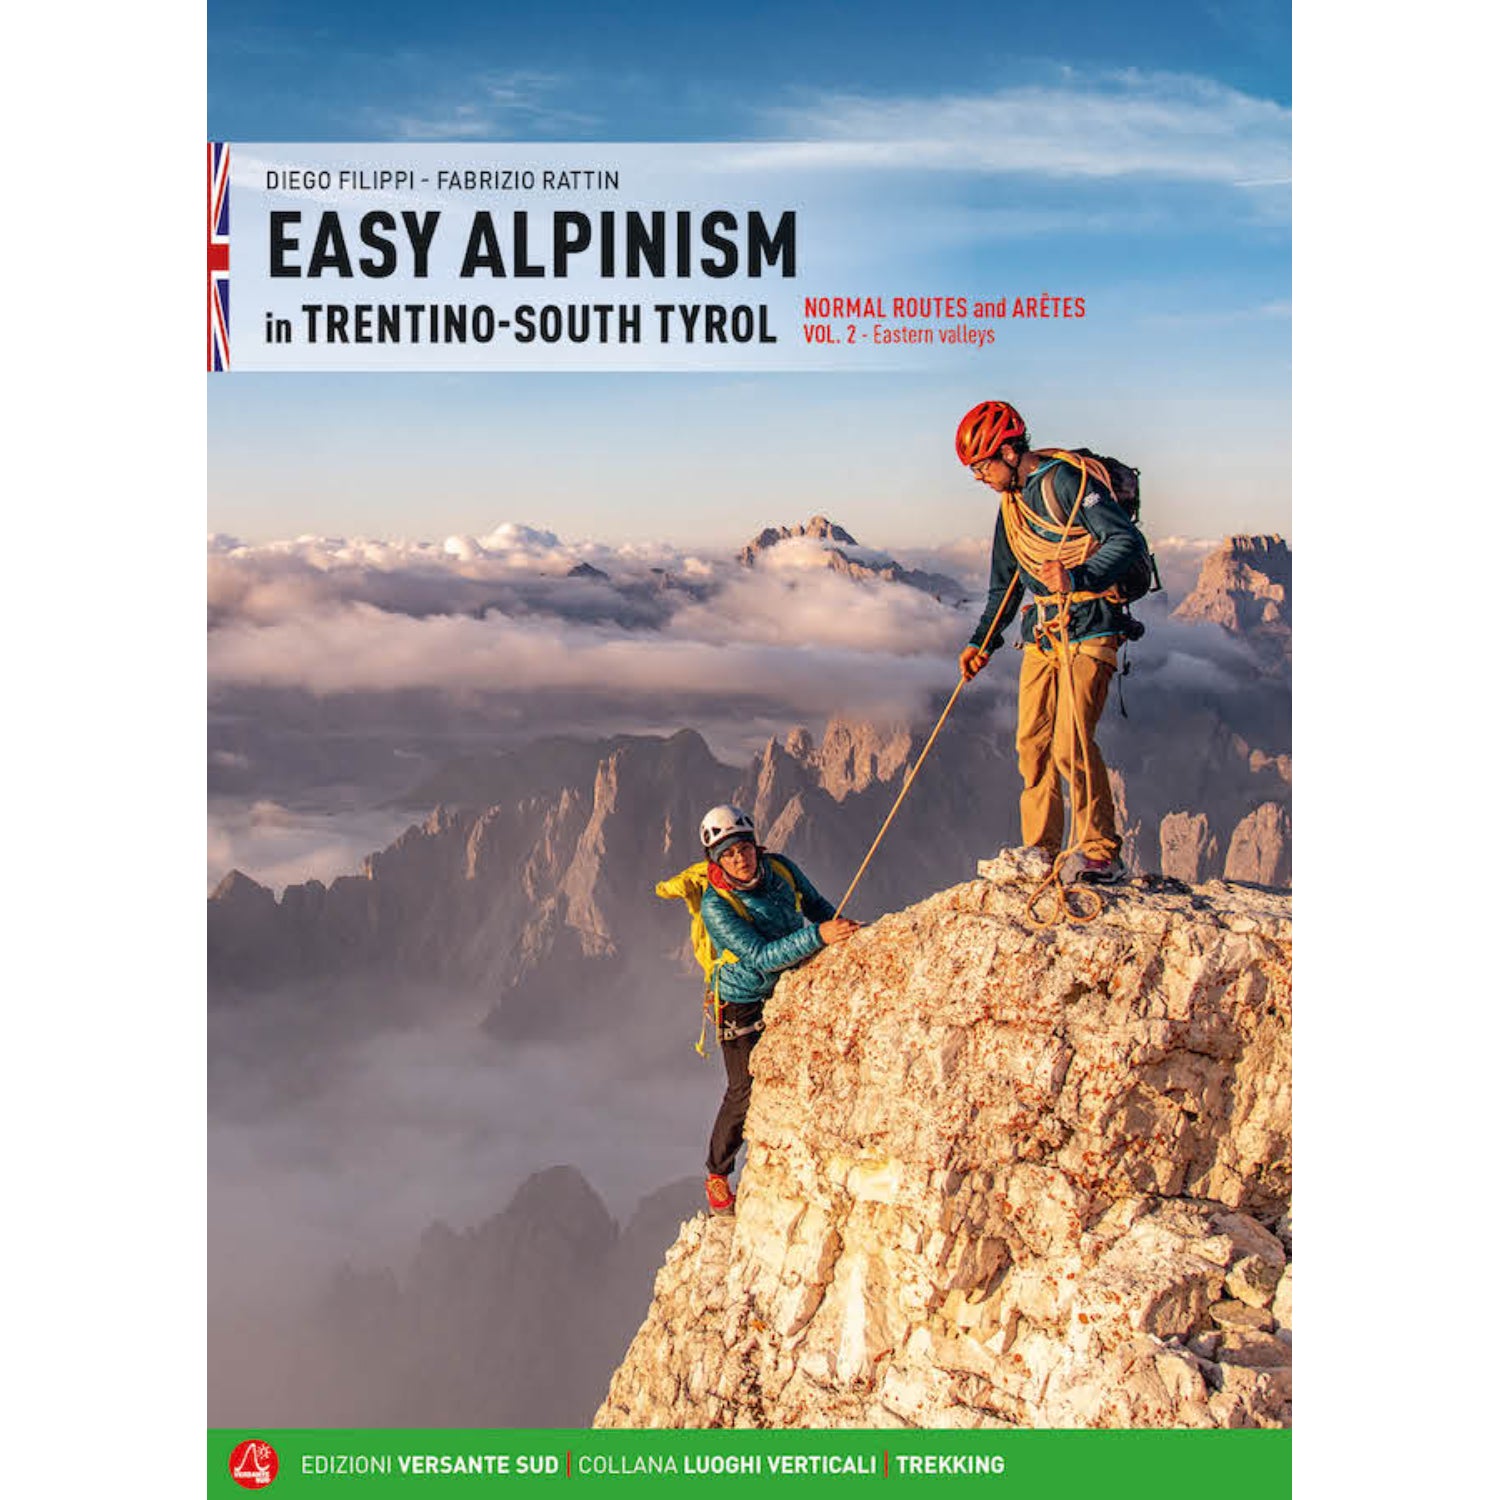 Easy Alpinism in Trentino: South Tyrol: Vol 2 guide book